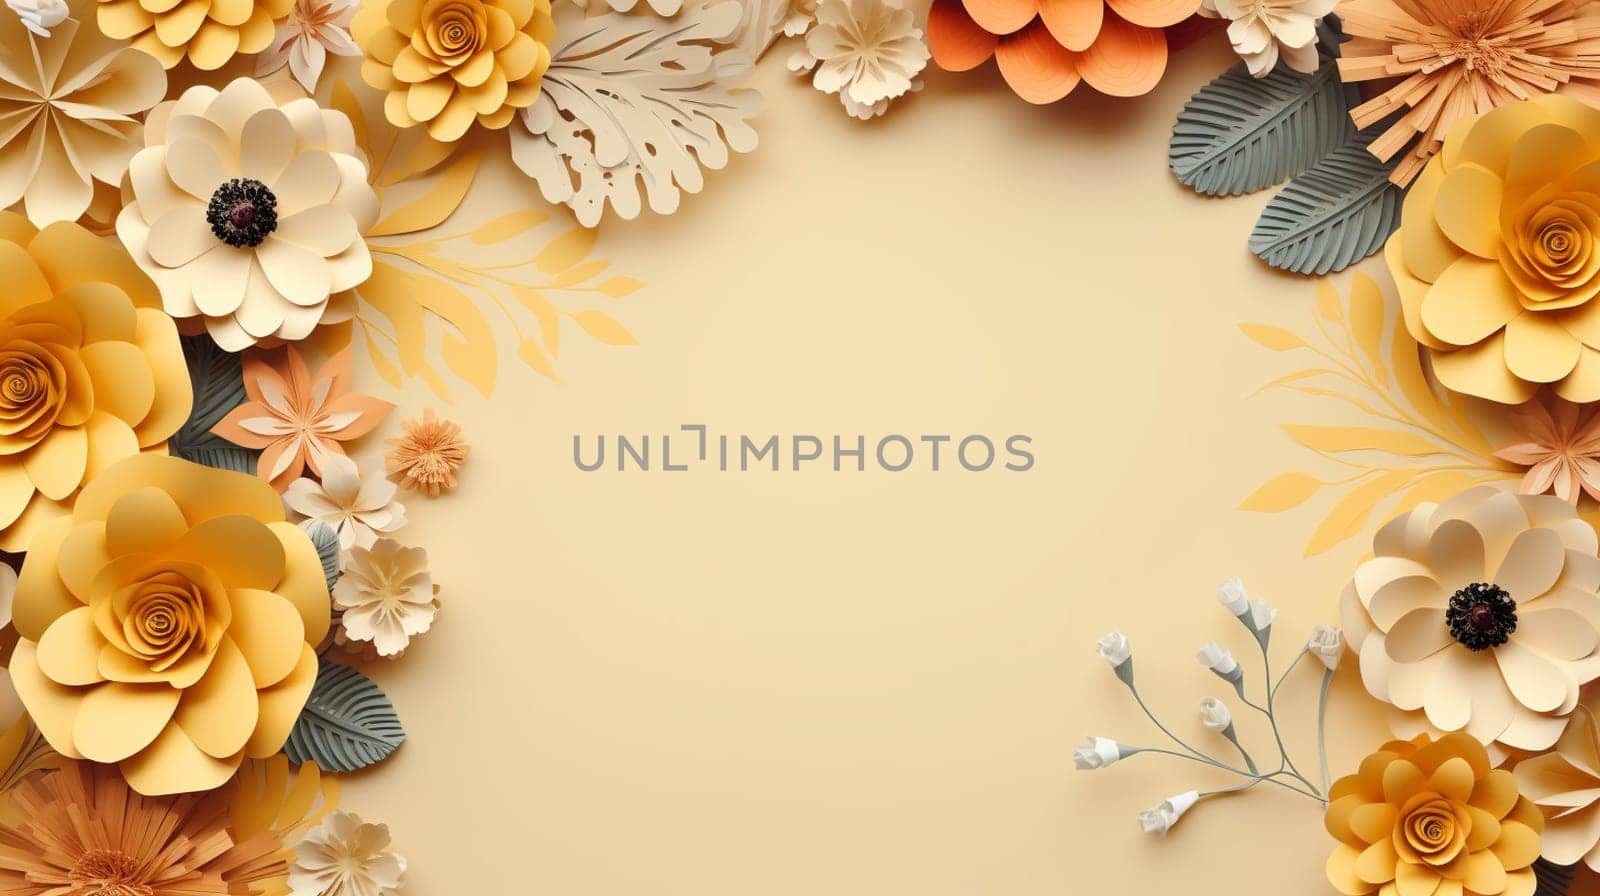 An array of intricate paper flowers in shades of yellow, orange, and white, beautifully arranged on a bright yellow background, showcasing a stunning variety of blooms and foliage by kizuneko